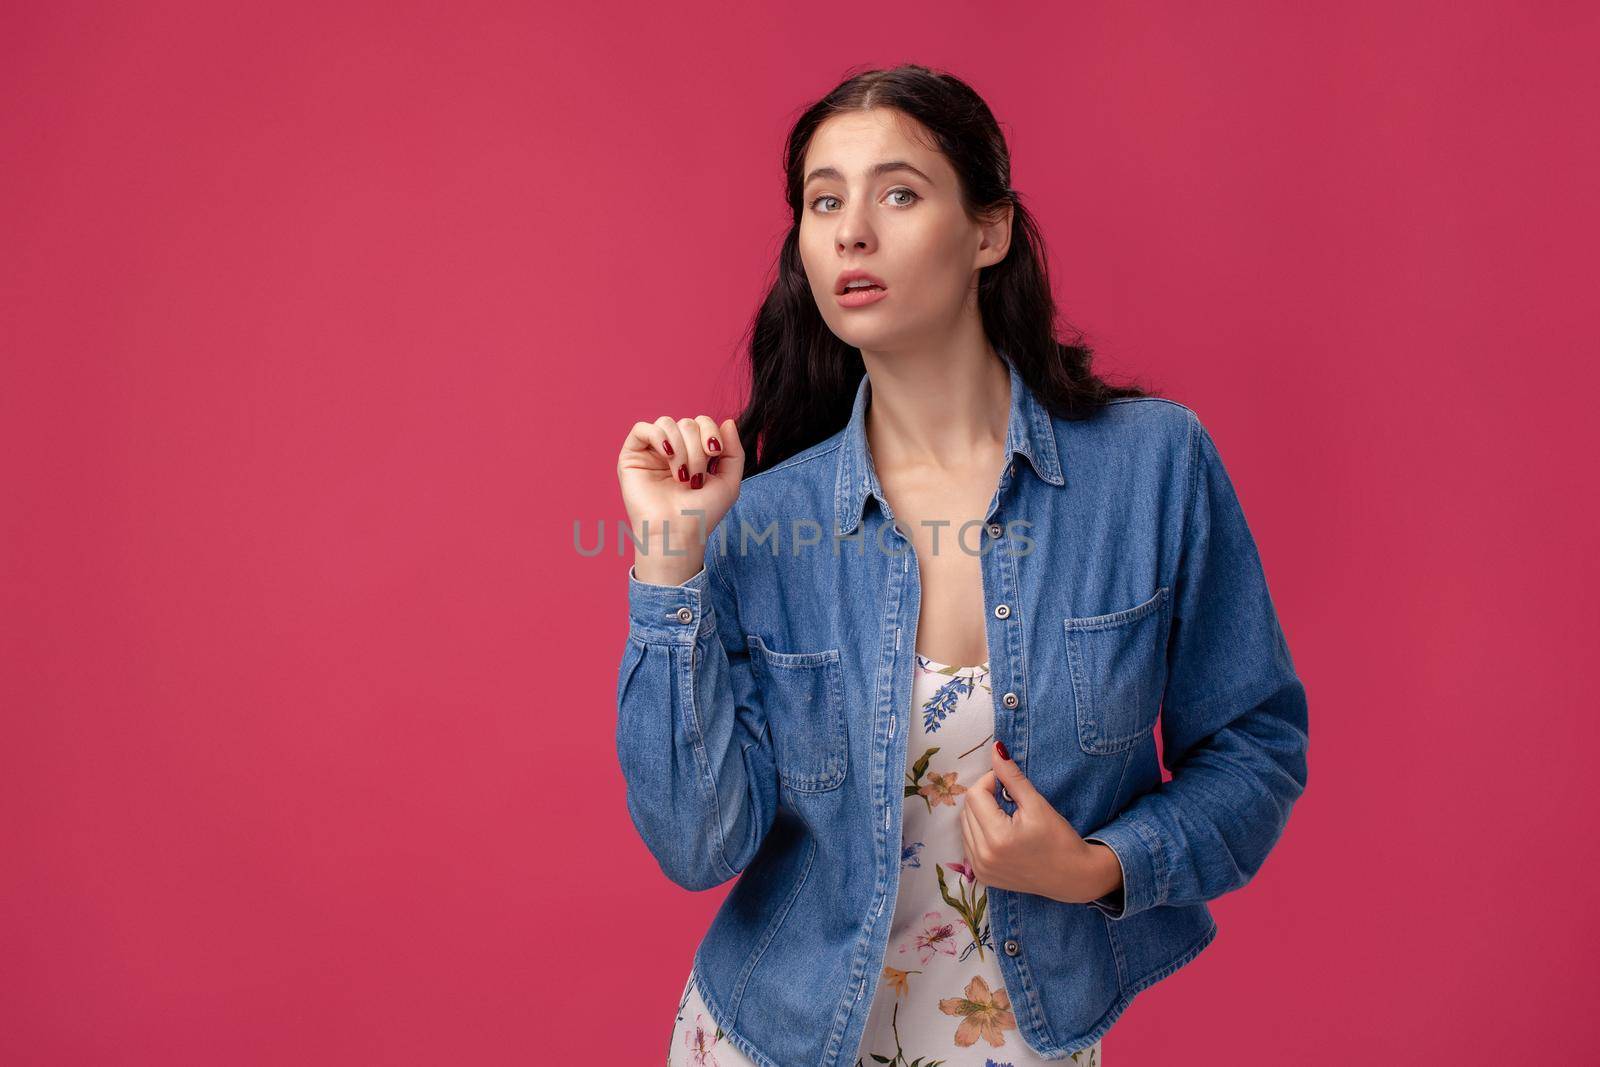 Portrait of a wondered young woman in a white dress with floral print and blue denim shirt standing on a pink wall background in studio. People sincere emotions, lifestyle concept. Mockup copy space.